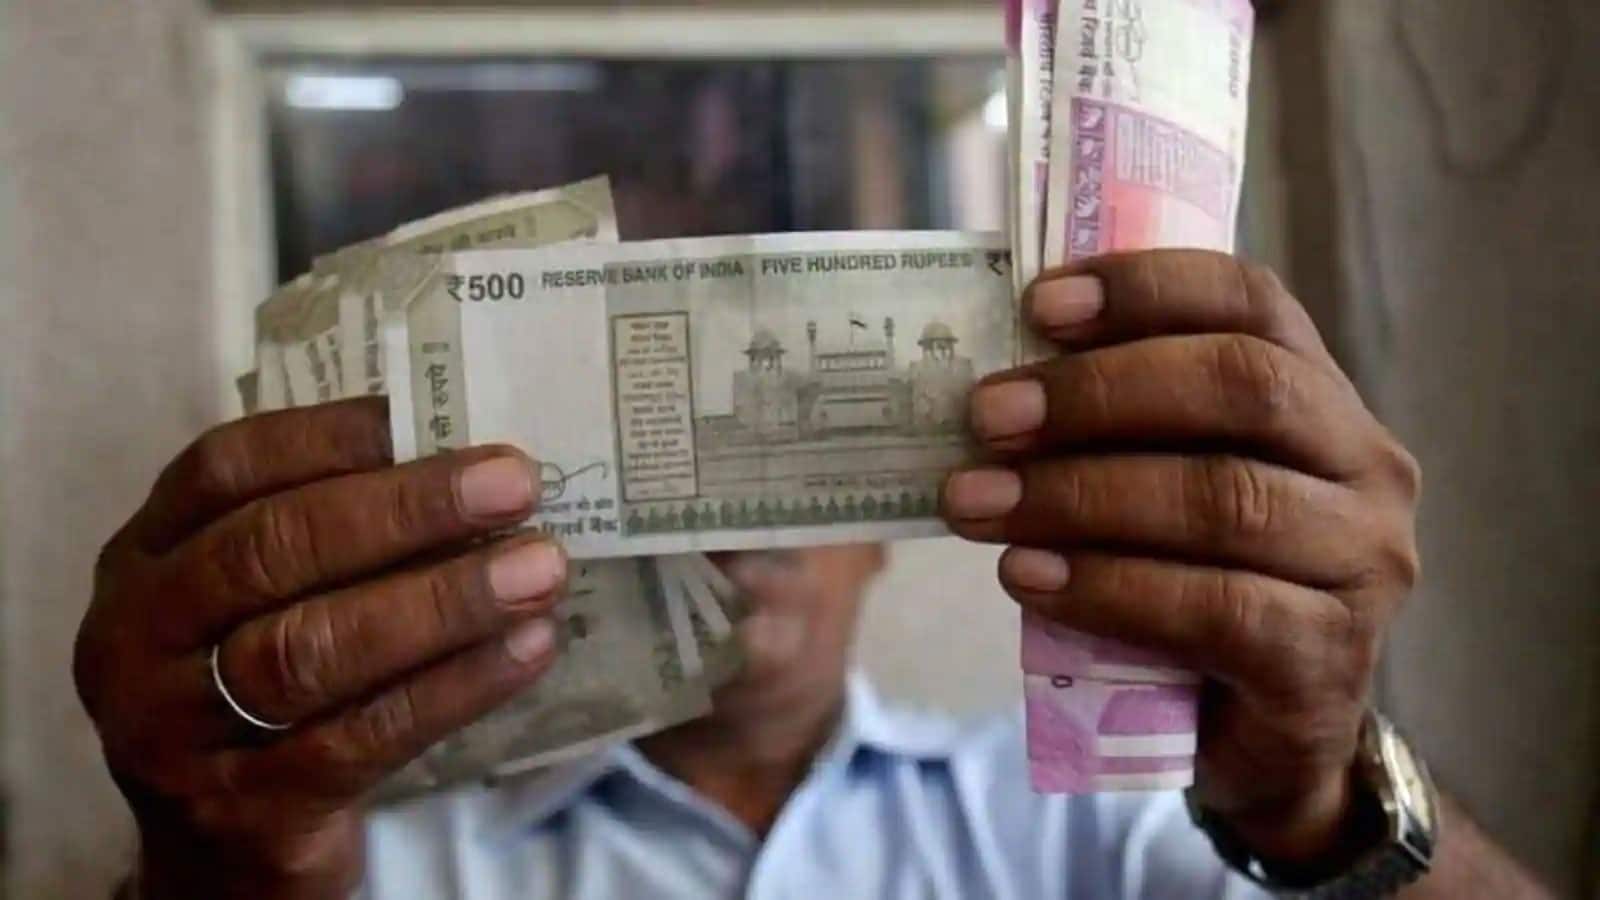 7th Pay Commission: 4% increase in DA of central employees effective from 1 July 2022, know truth behind the viral post | Personal Finance News